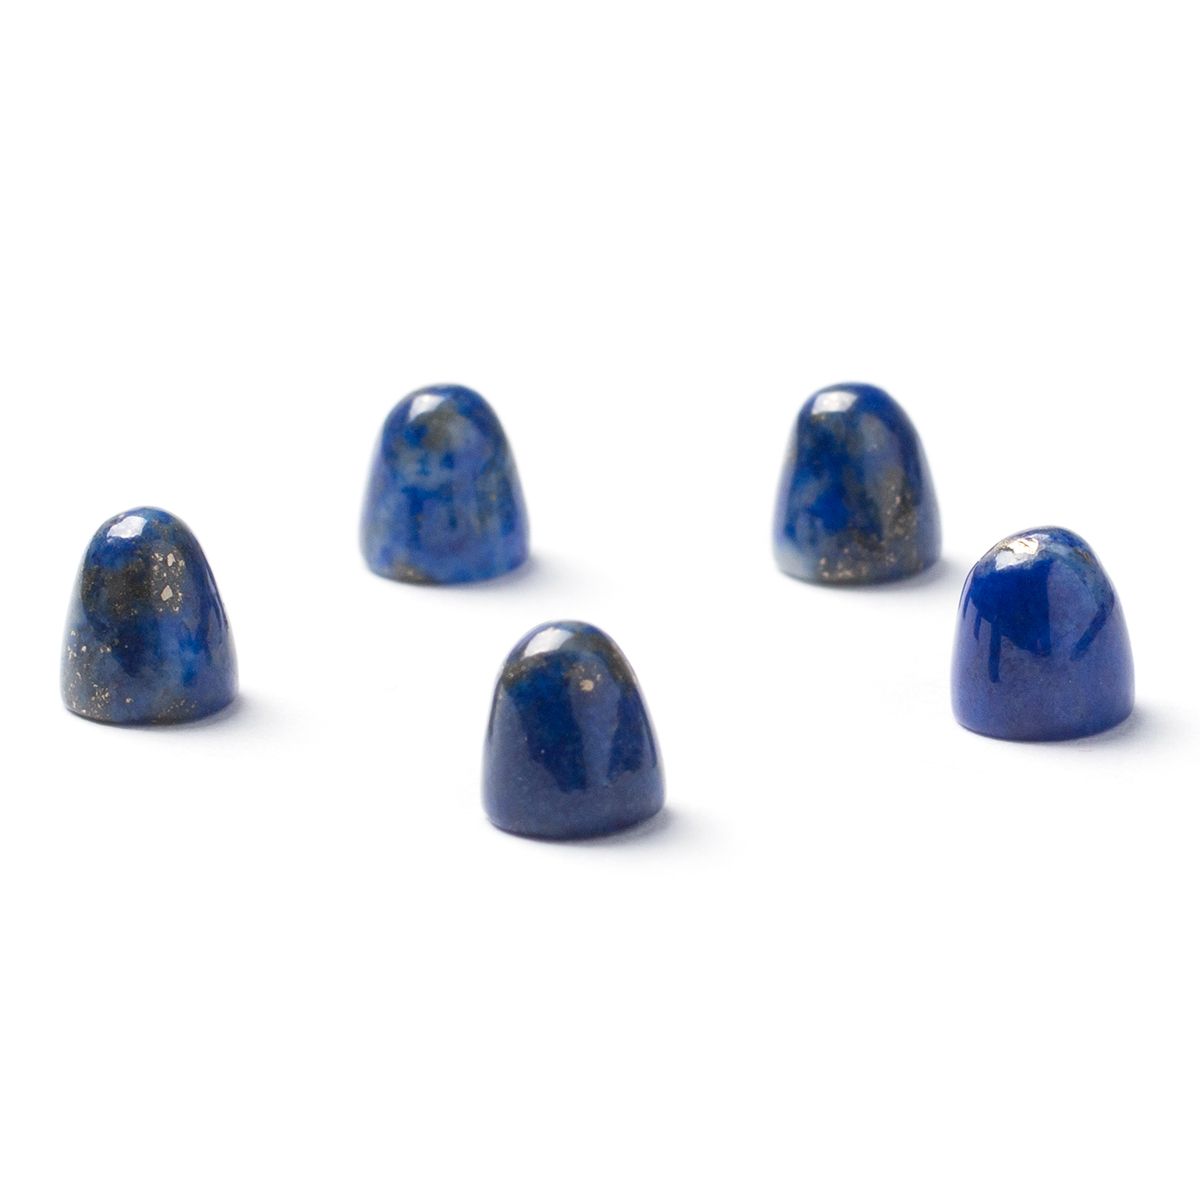 Lapis Lazuli Bullet Shaped Cabochons, Approx 5mm